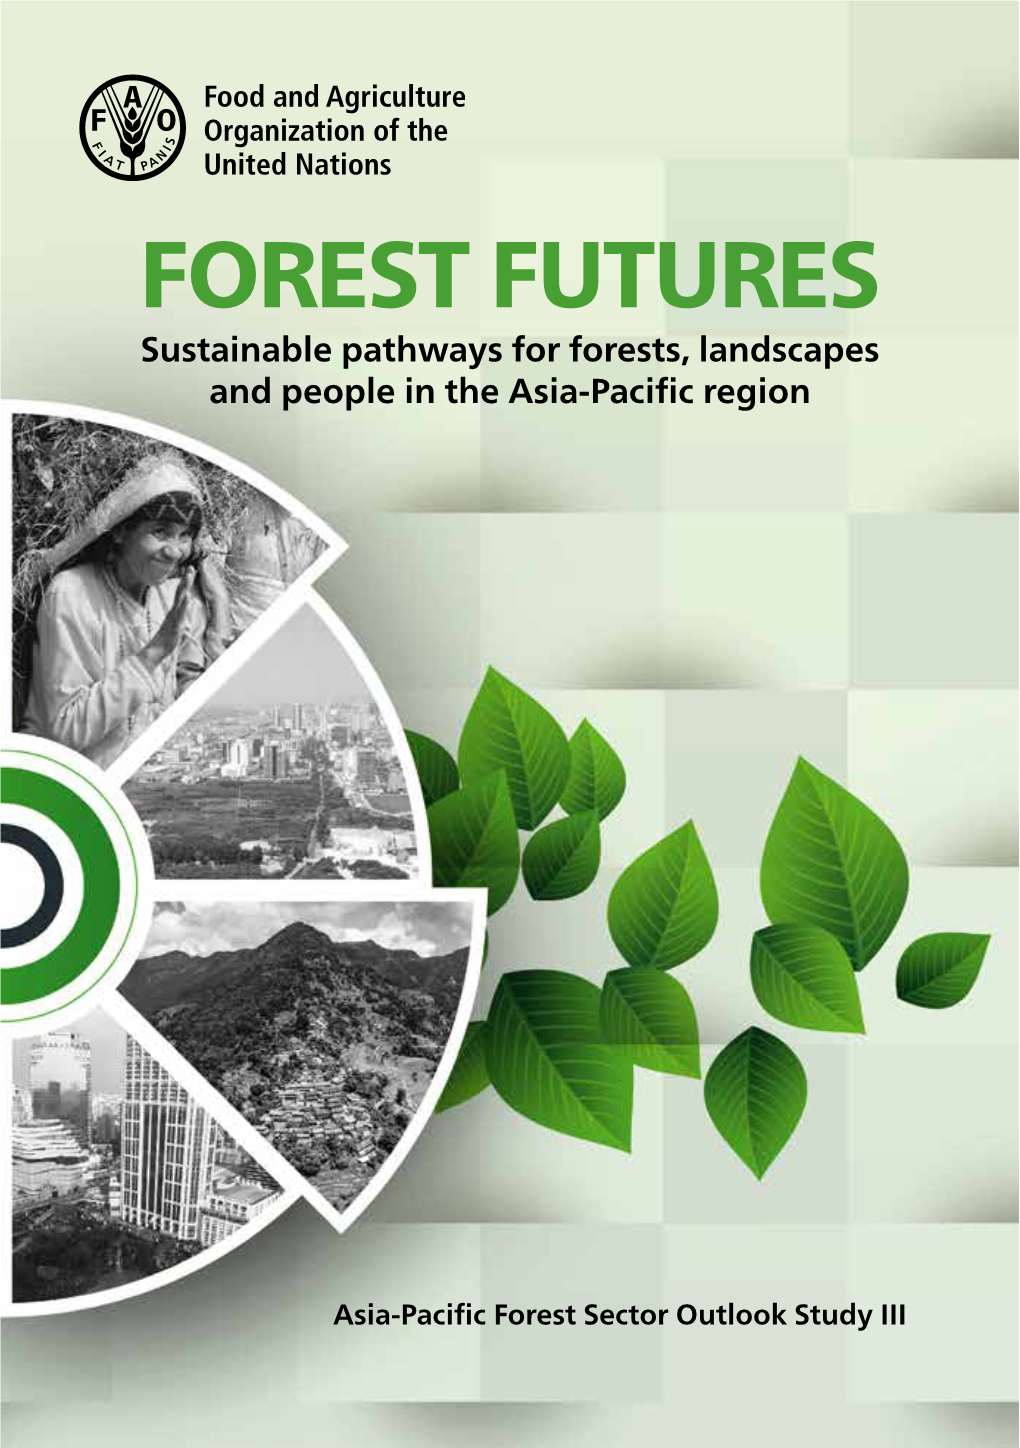 Asia-Pacific Forest Sector Outlook Study III